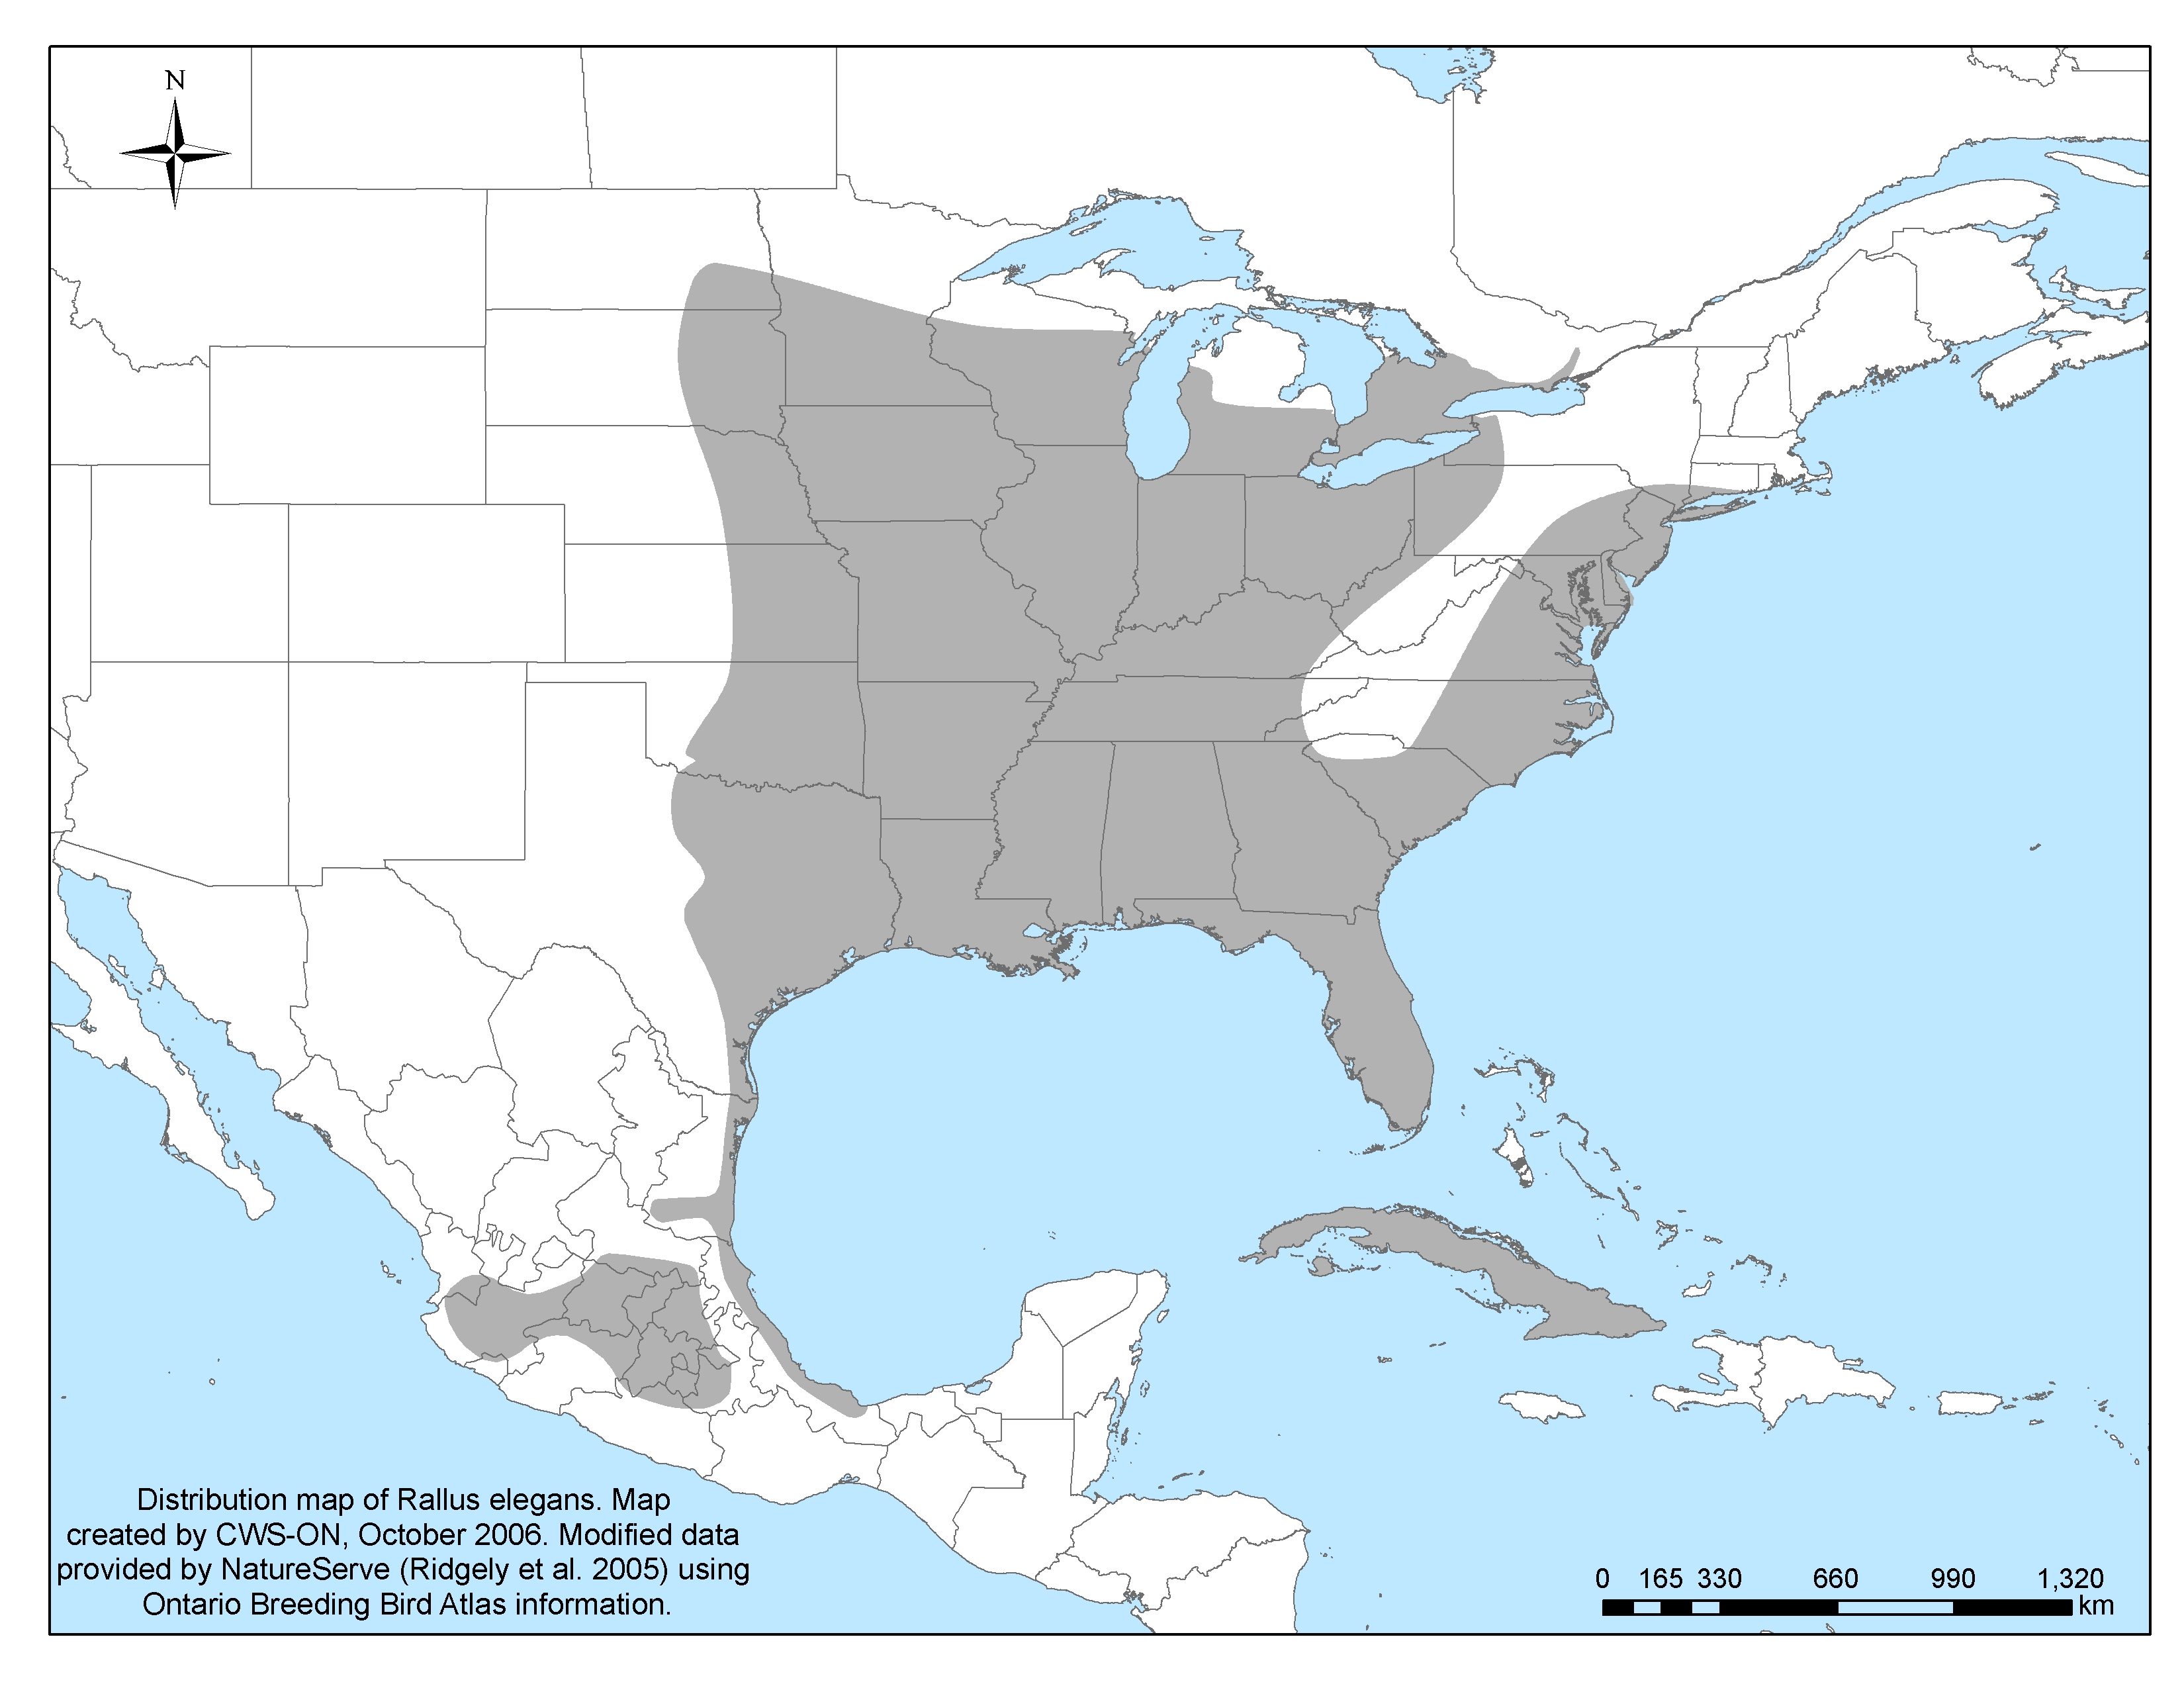 Map of the global distribution of the King Rail. The King Rail is found from the Gulf Coast to southern Ontario, and from the Atlantic Coast to about the 100th meridian in the Great Plains. It is also found in Cuba and the interior of Mexico. Data was provided to create this map by NatureServe in collaboration with Robert Ridgely, James Zook, The Nature Conservancy - Migratory Bird Program, Conservation International – Centre for Applied BiodiversityScience, World Wildlife Fund – U.S., and Environment Canada – WILDSPACE.